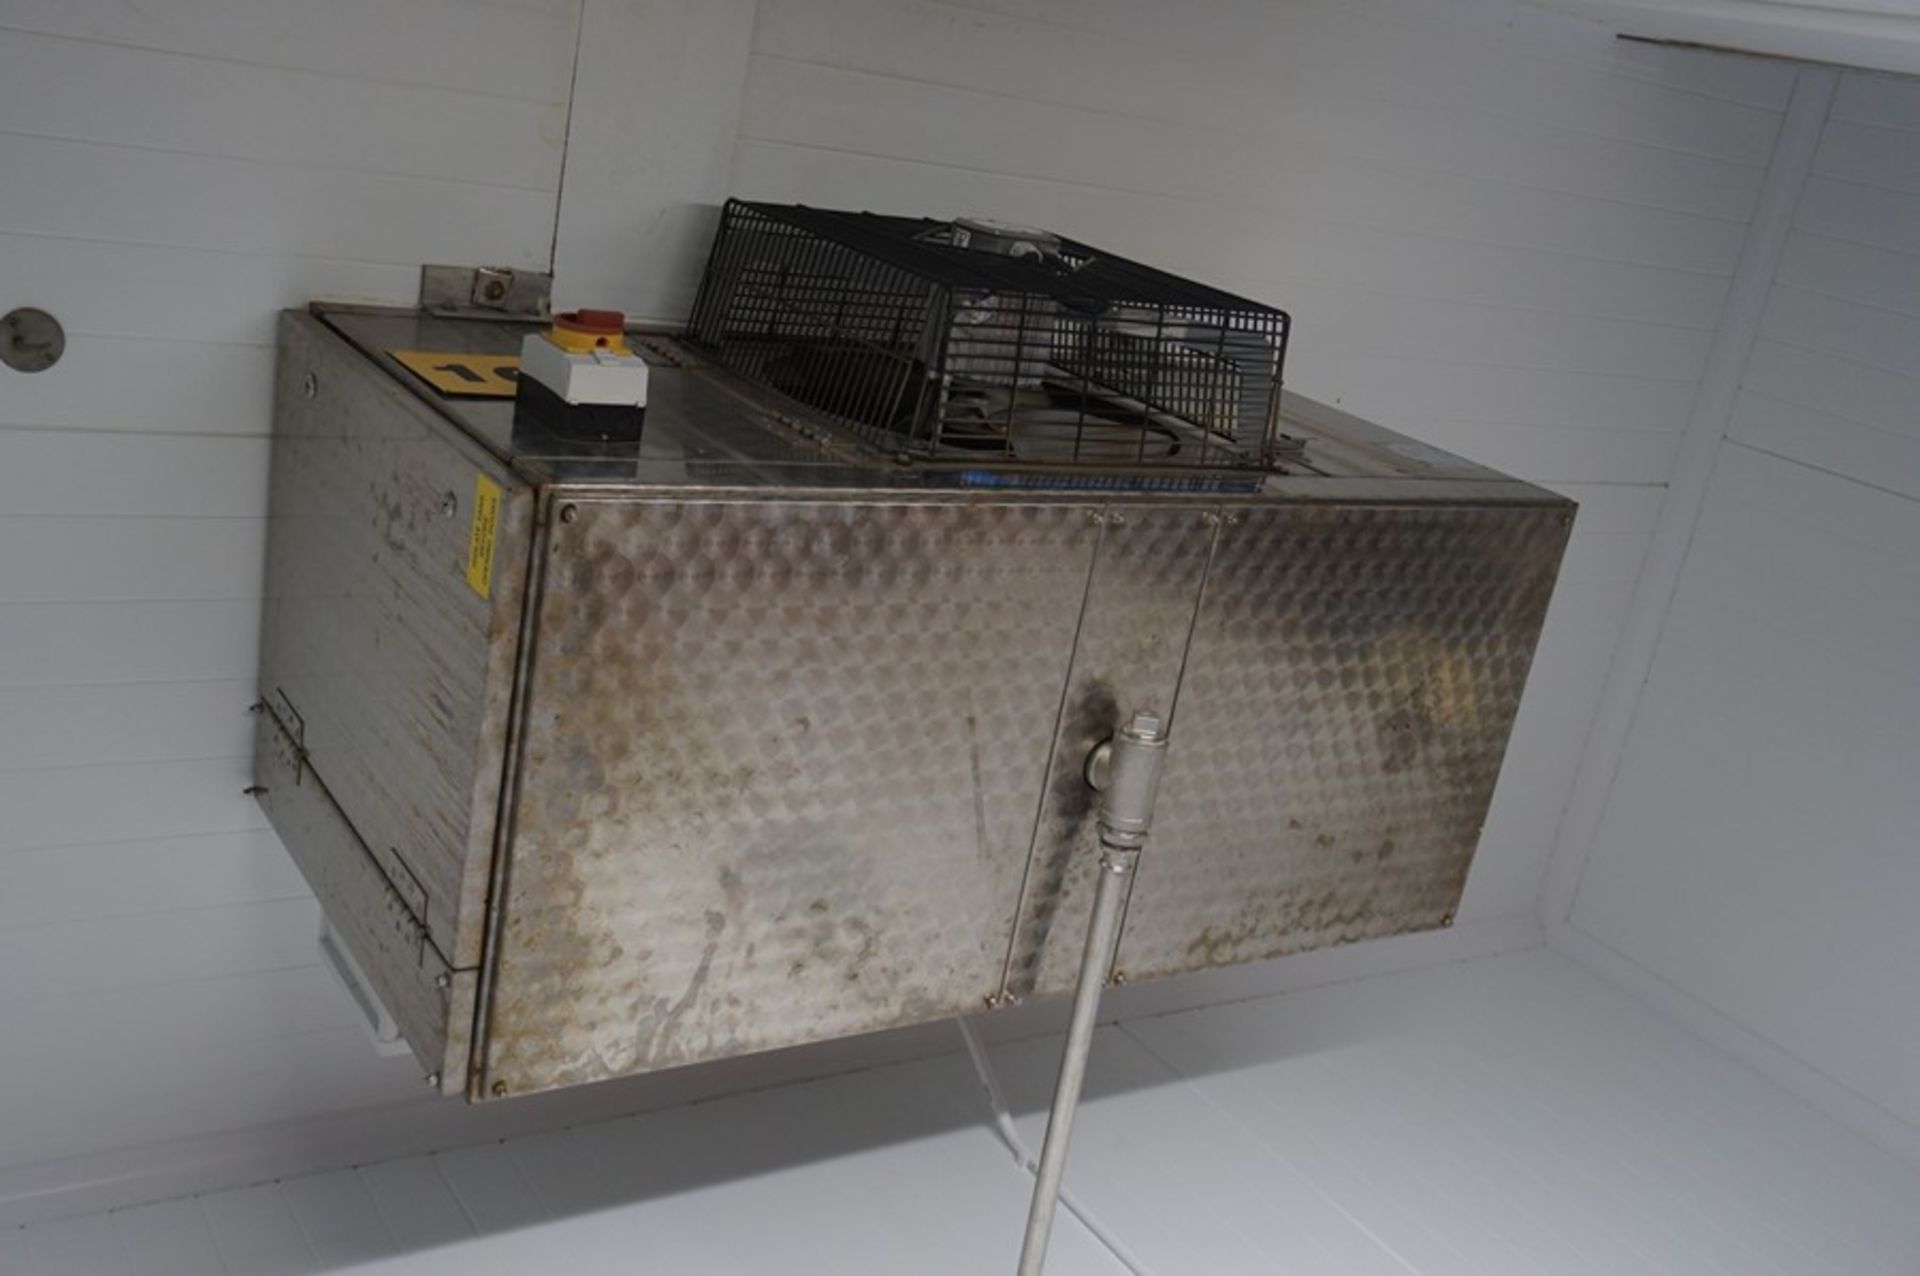 Coolers & Condensers, stainless steel single fan chiller unit (2005) Max: 100'c Min: -50'c (Lift out - Image 2 of 2